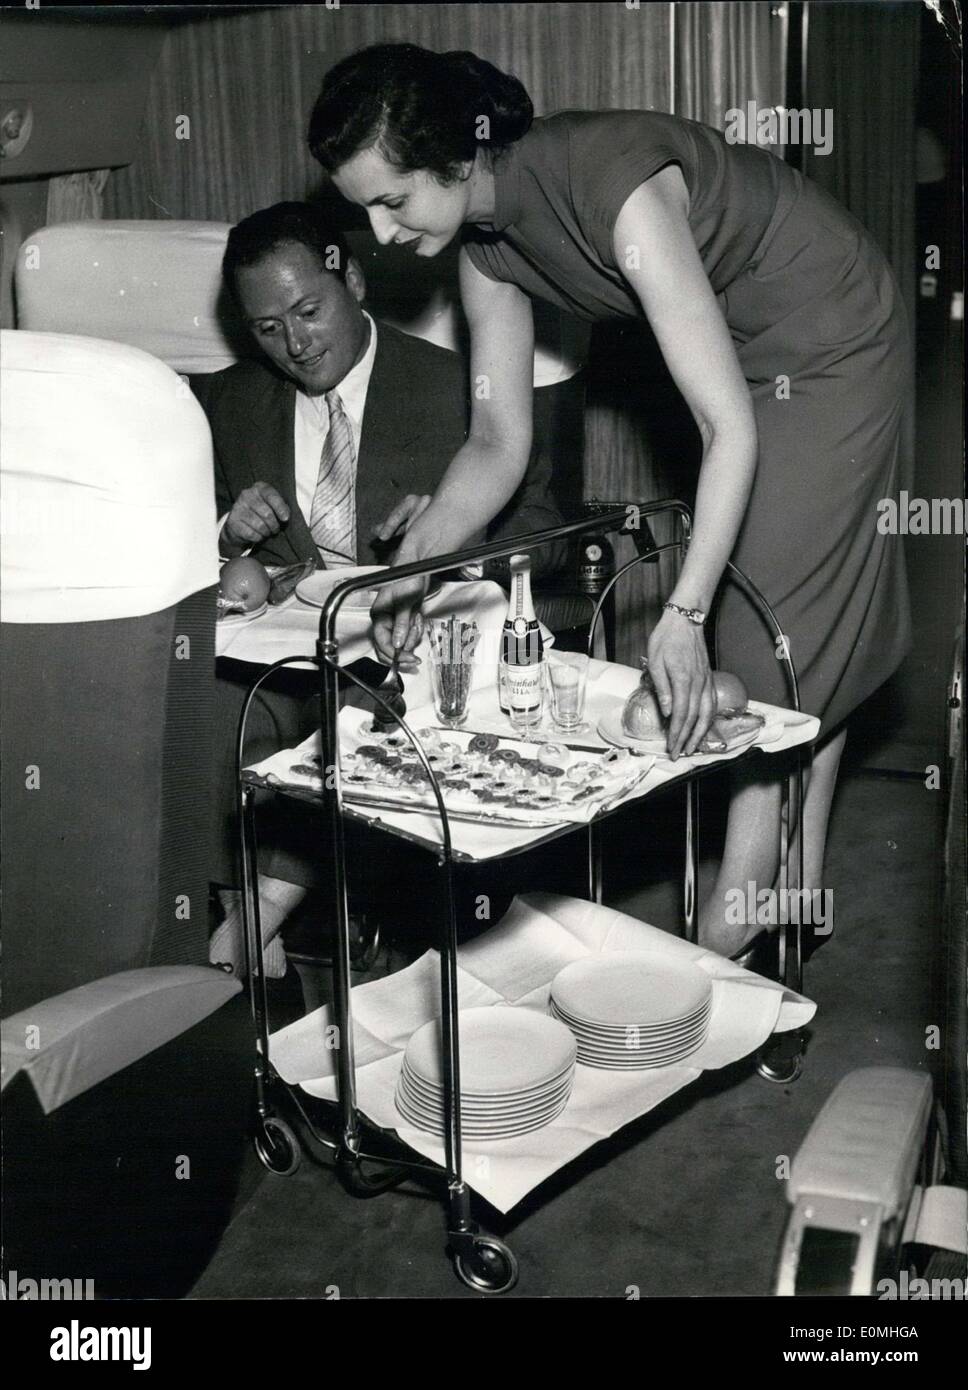 Jul. 29, 1955 - This stewardess is serving a man on a Lufthansa flight en route to New York from Germany. t Stock Photo